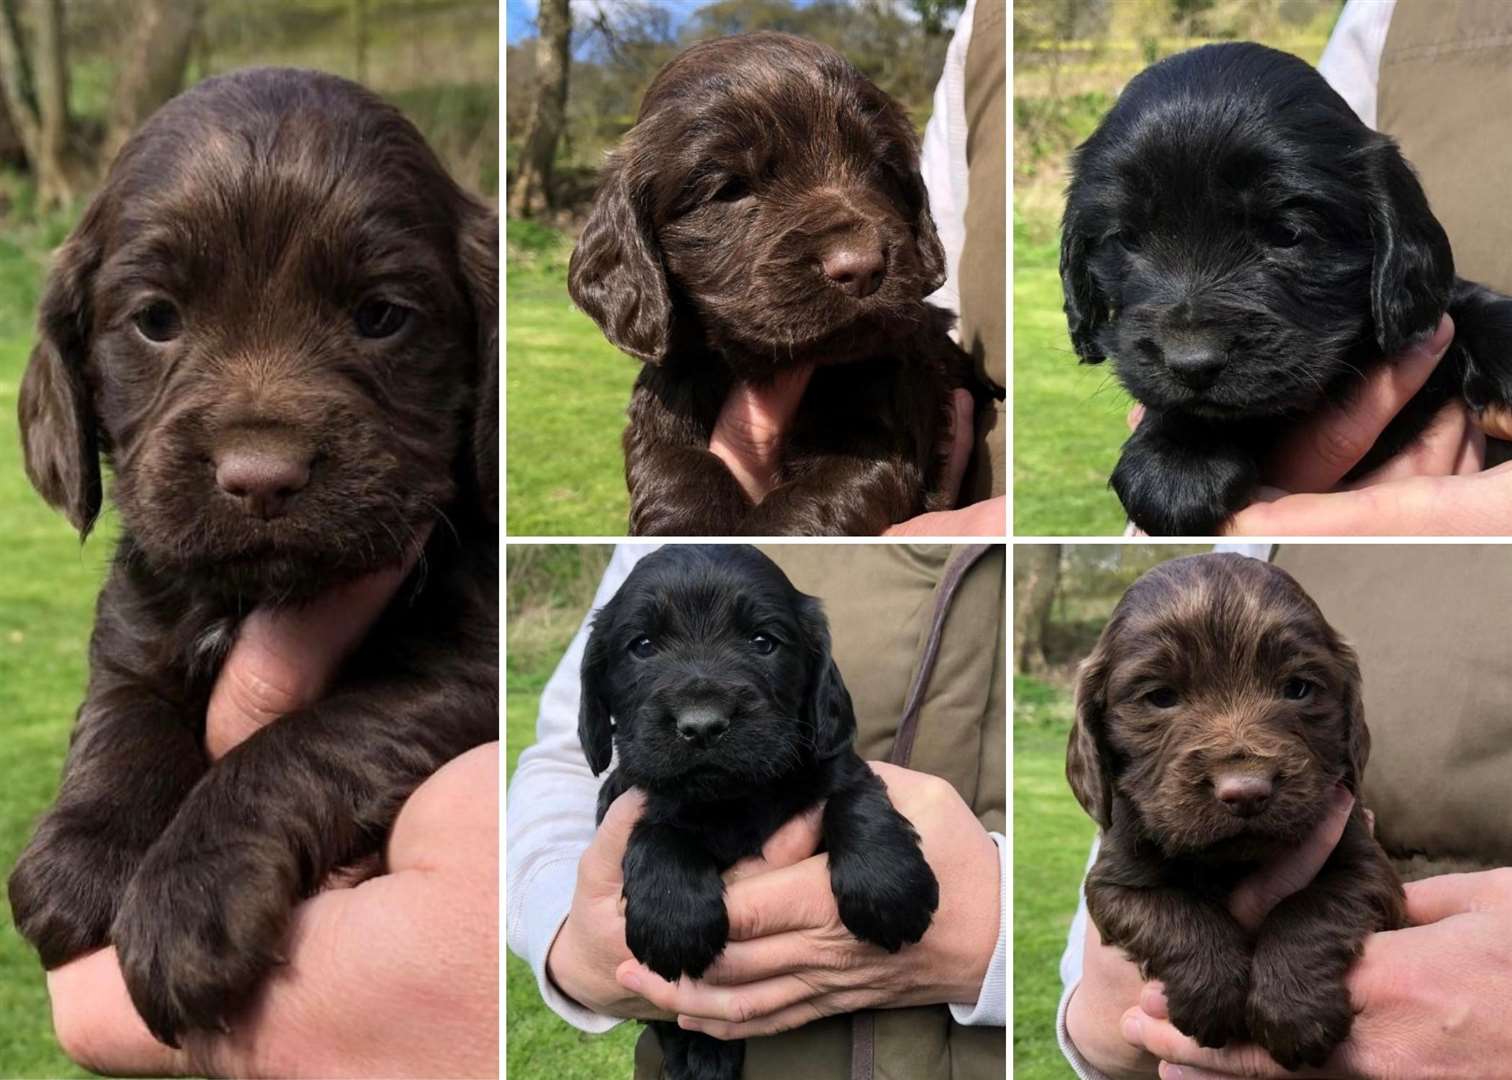 The five puppies were stolen on Tuesday